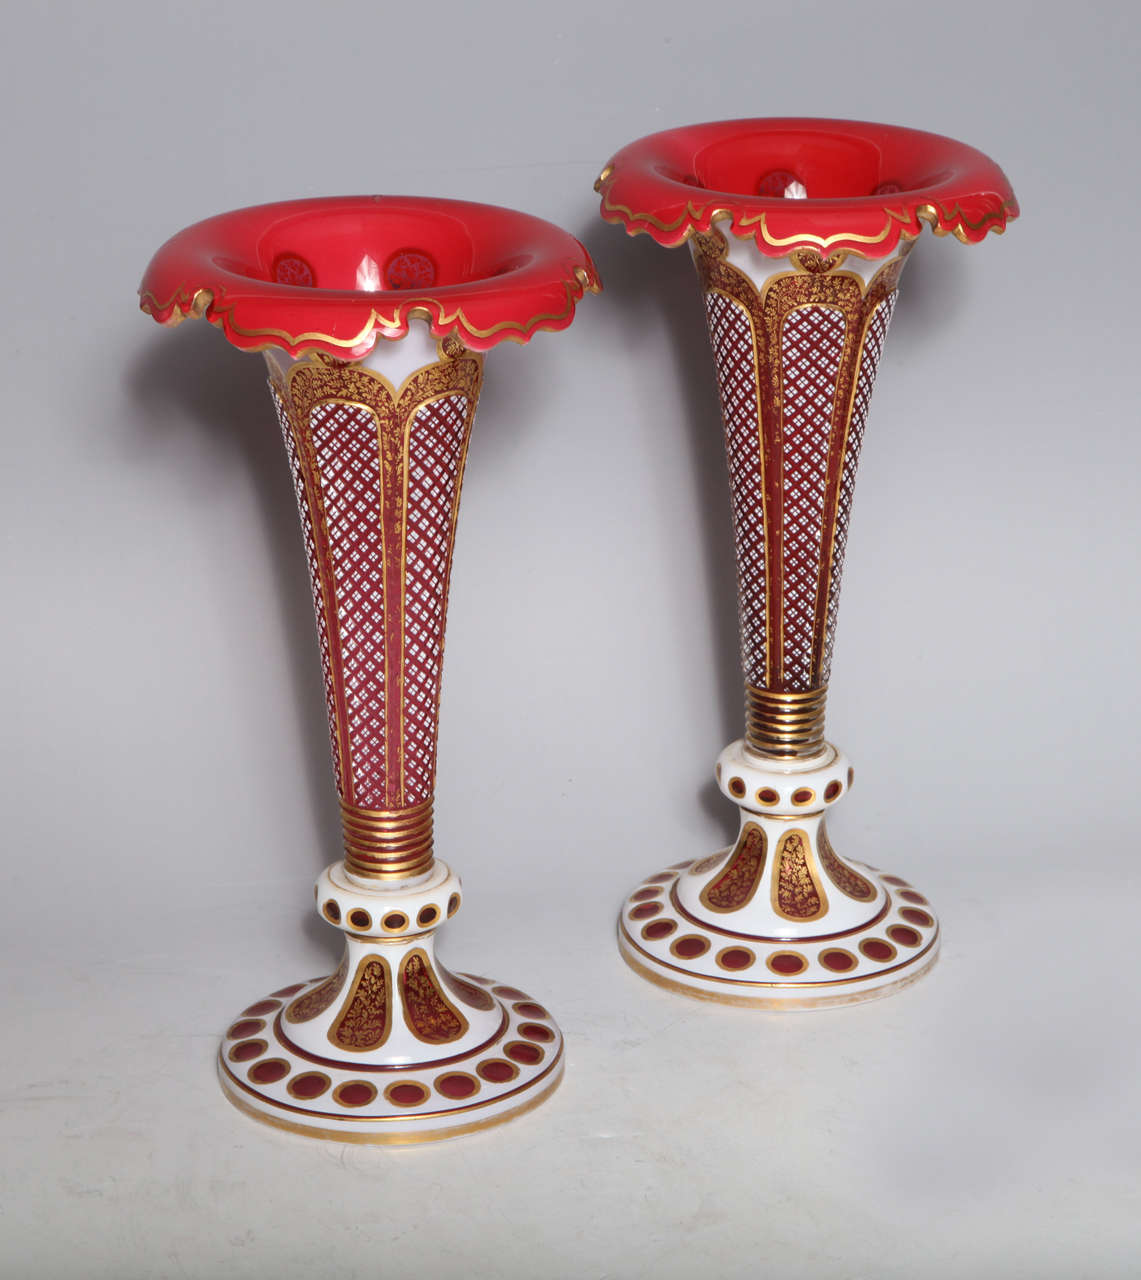 A fine pair of antique Bohemian, white over ruby red hand diamond cut, double overlay glass vases. Further beautifully decorated with 24-karat gold. Each modeled with very elaborate circular bases finely cut with cartouches, and the most beautiful